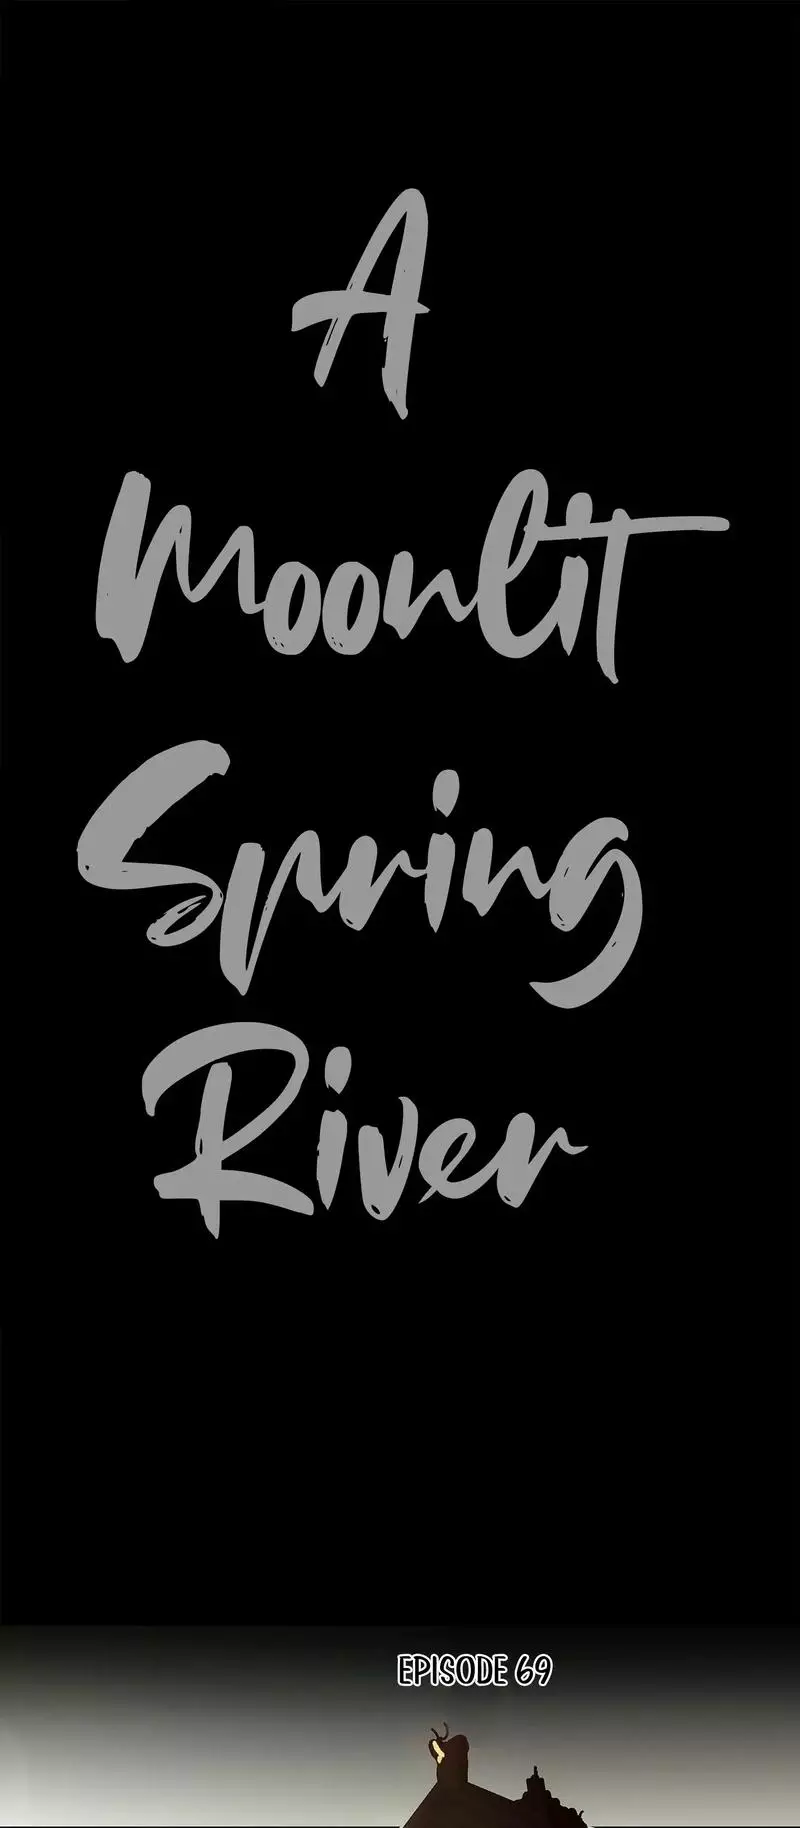 A Moonlit Spring River - 69 page 11-ee82cc07